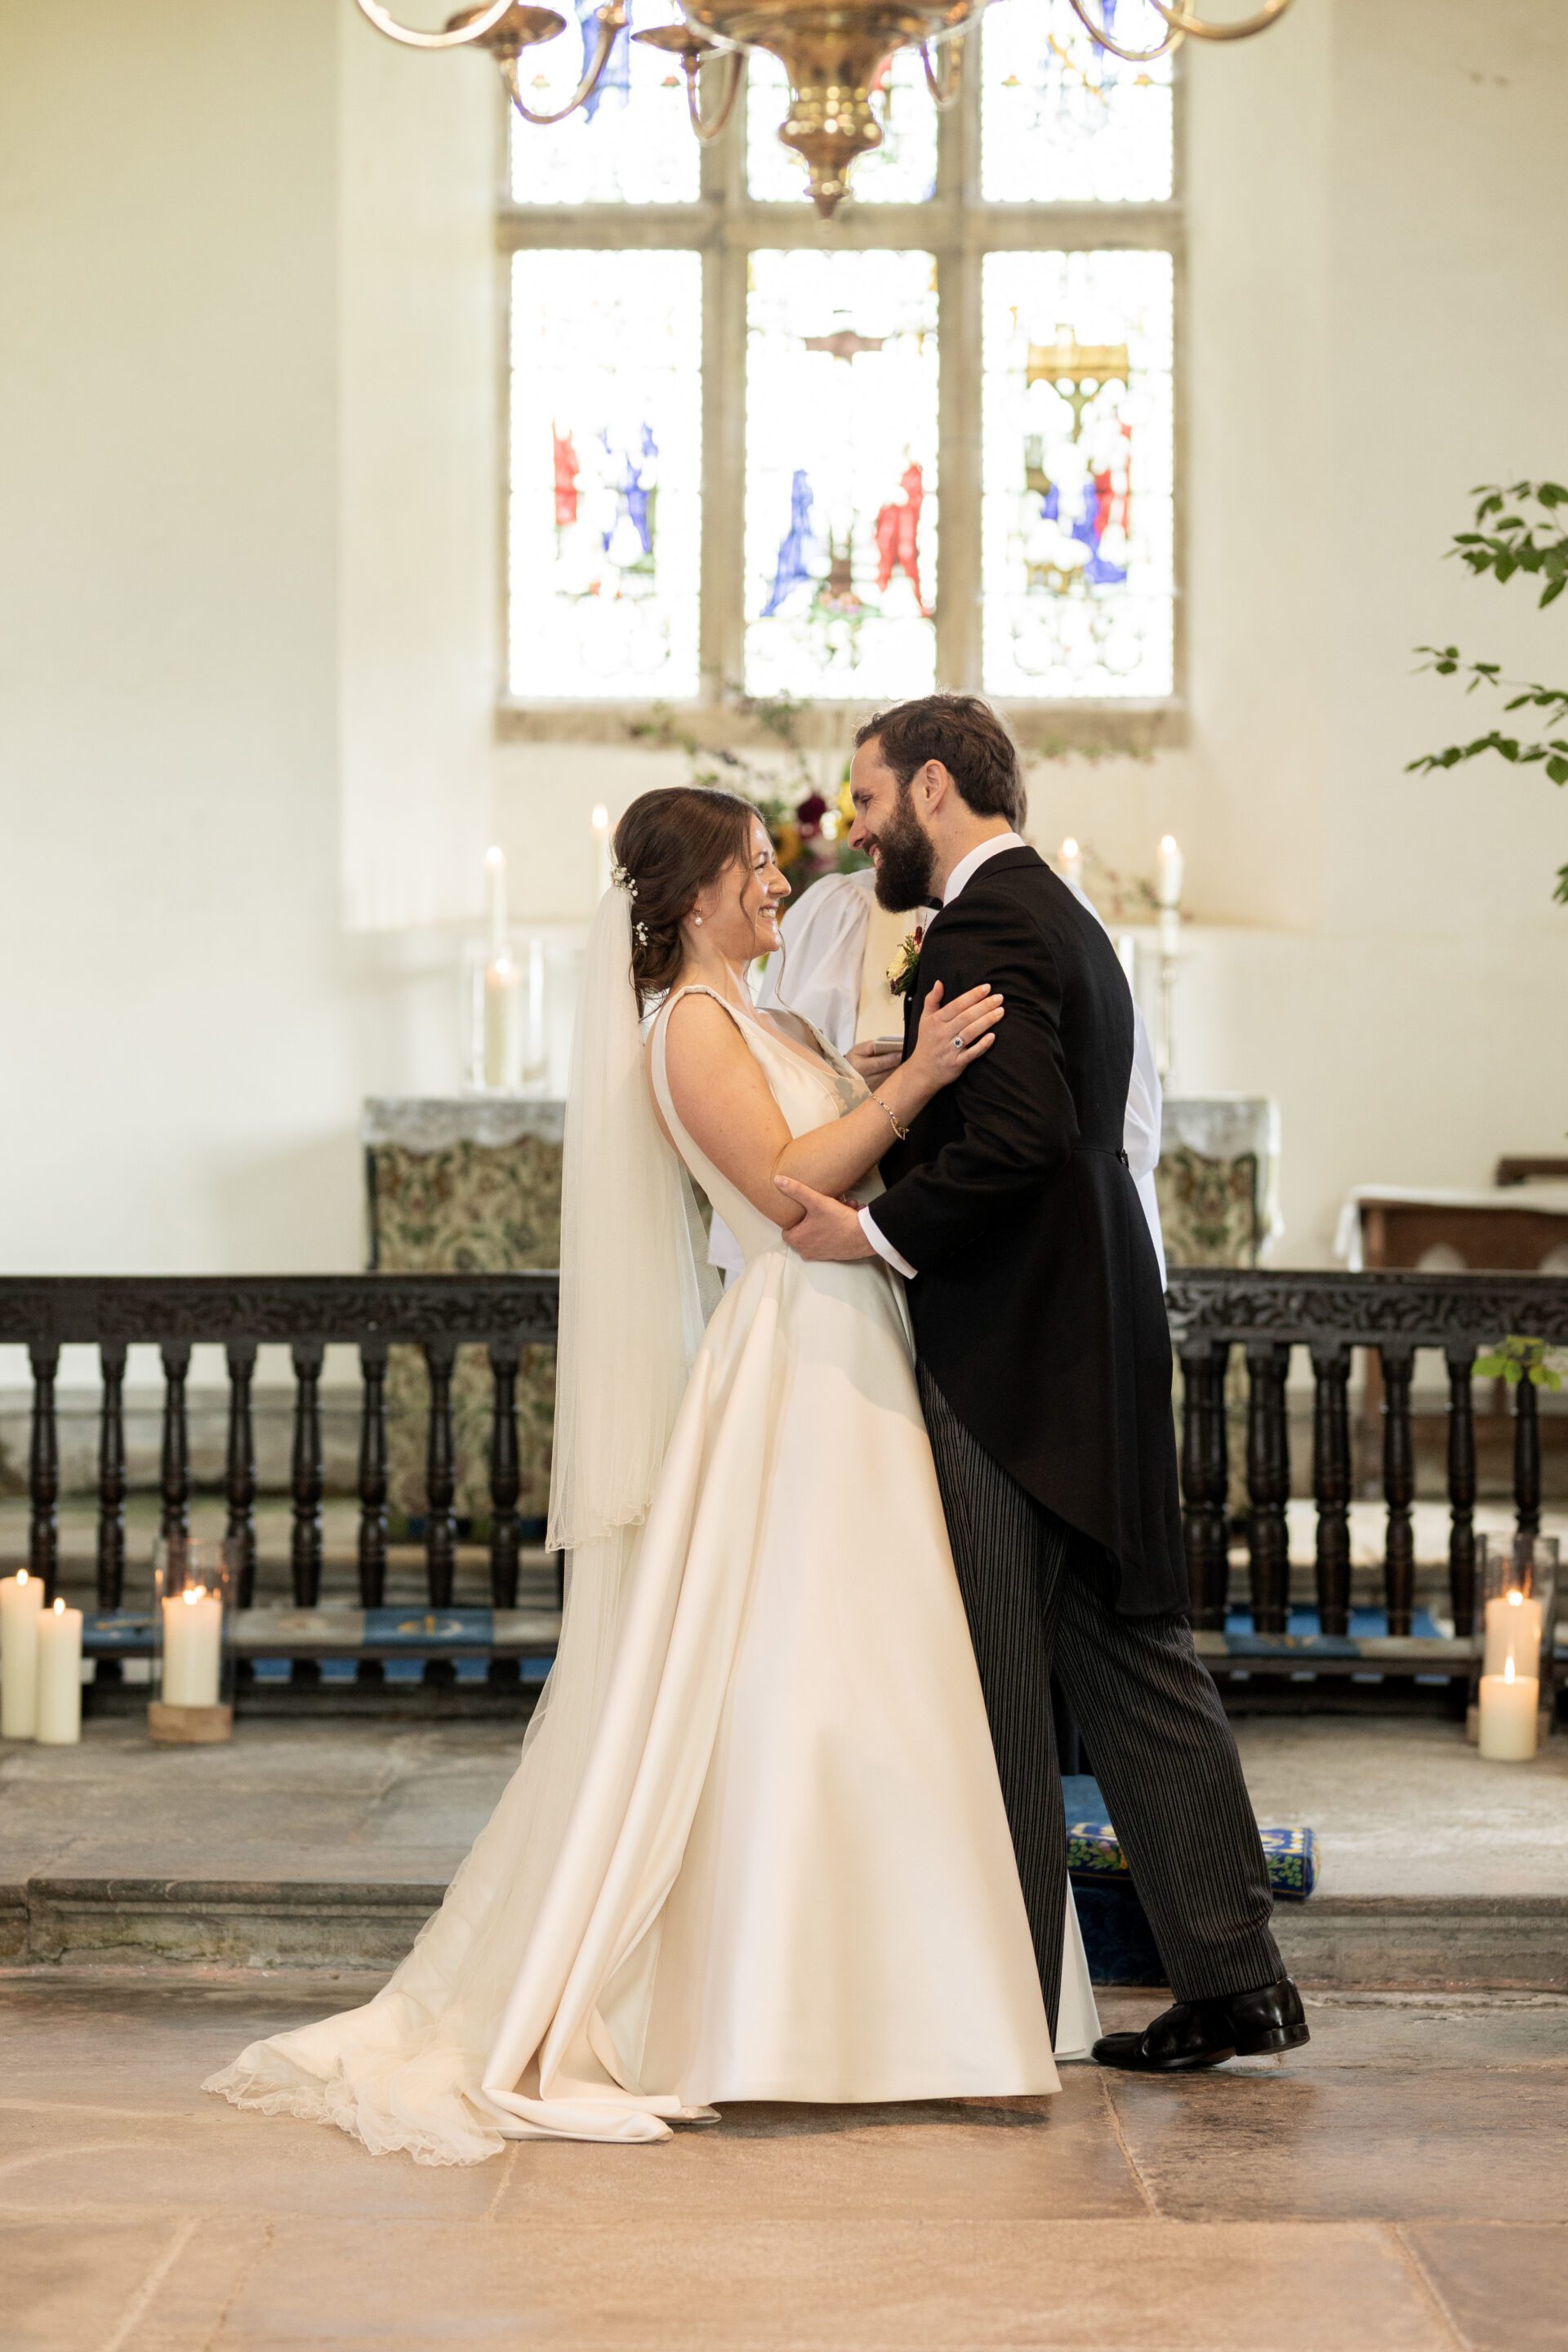 The bride and groom share their first kiss as husband and wife